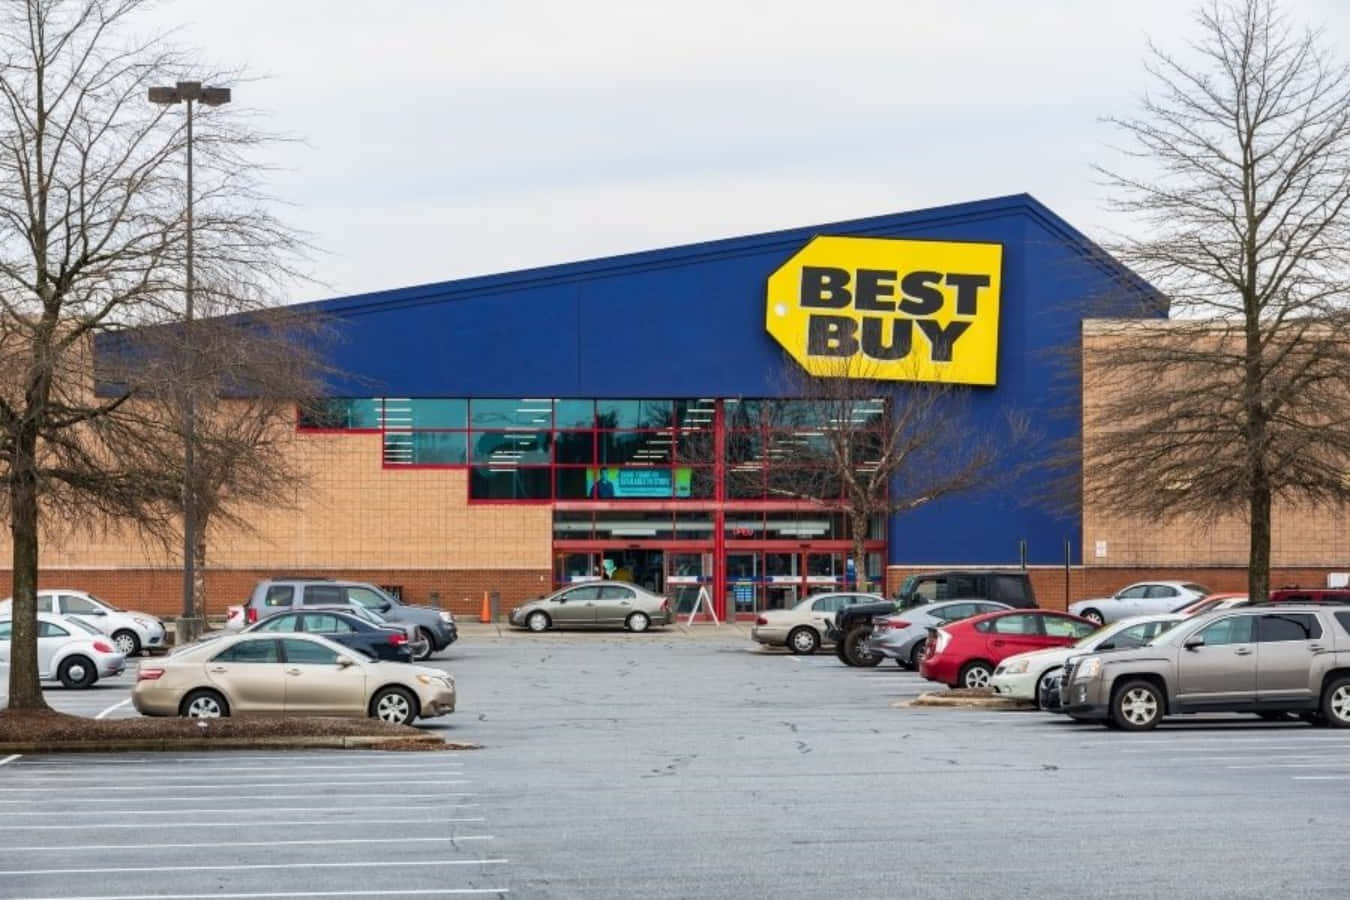 Best Buy Is A Large Store With Cars Parked In Front